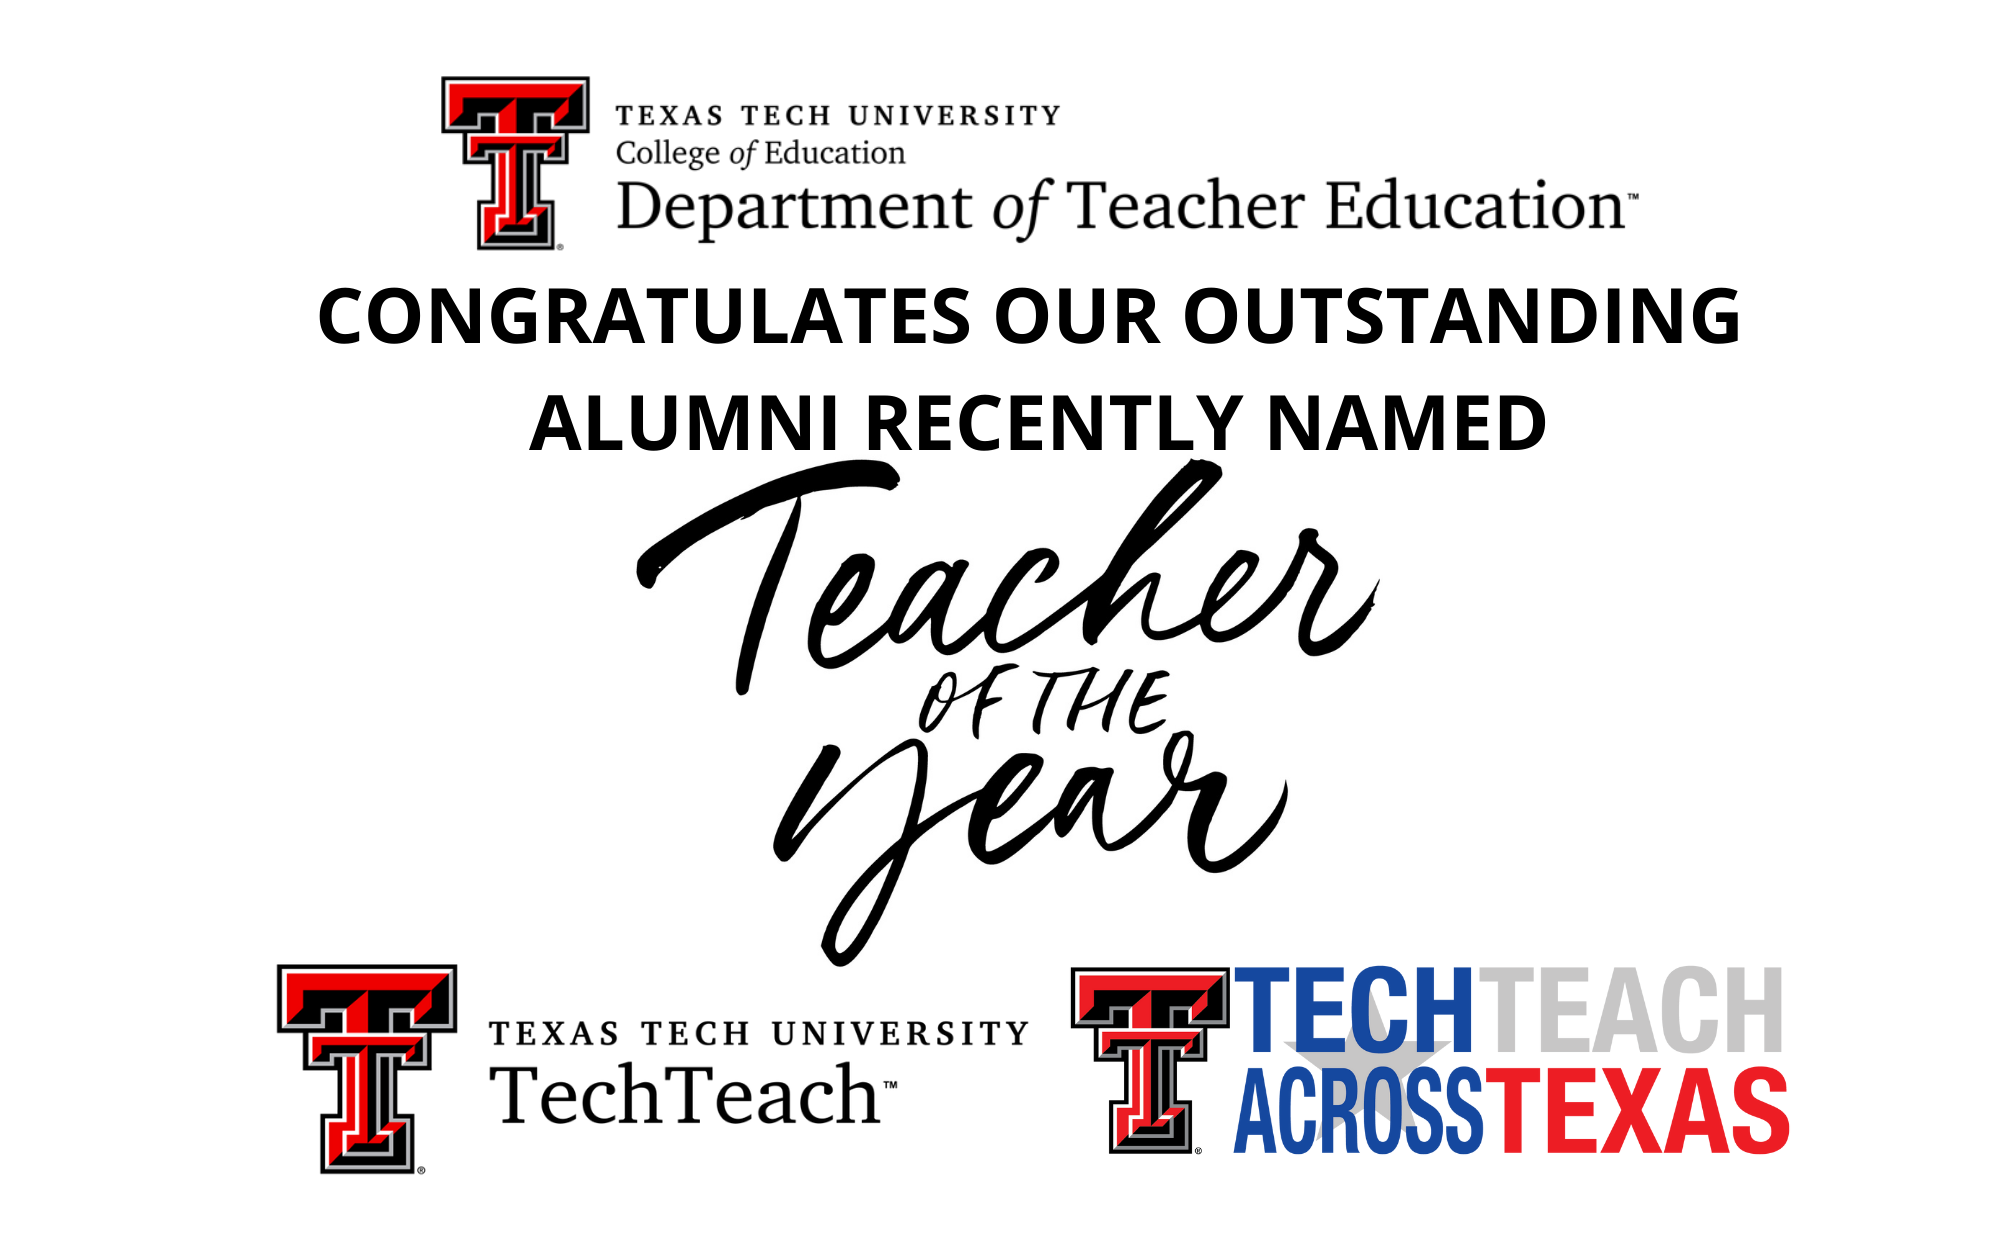 The Department of Teacher Education congratulates our outstanding alumni recently named TEACHER OF THE YEAR